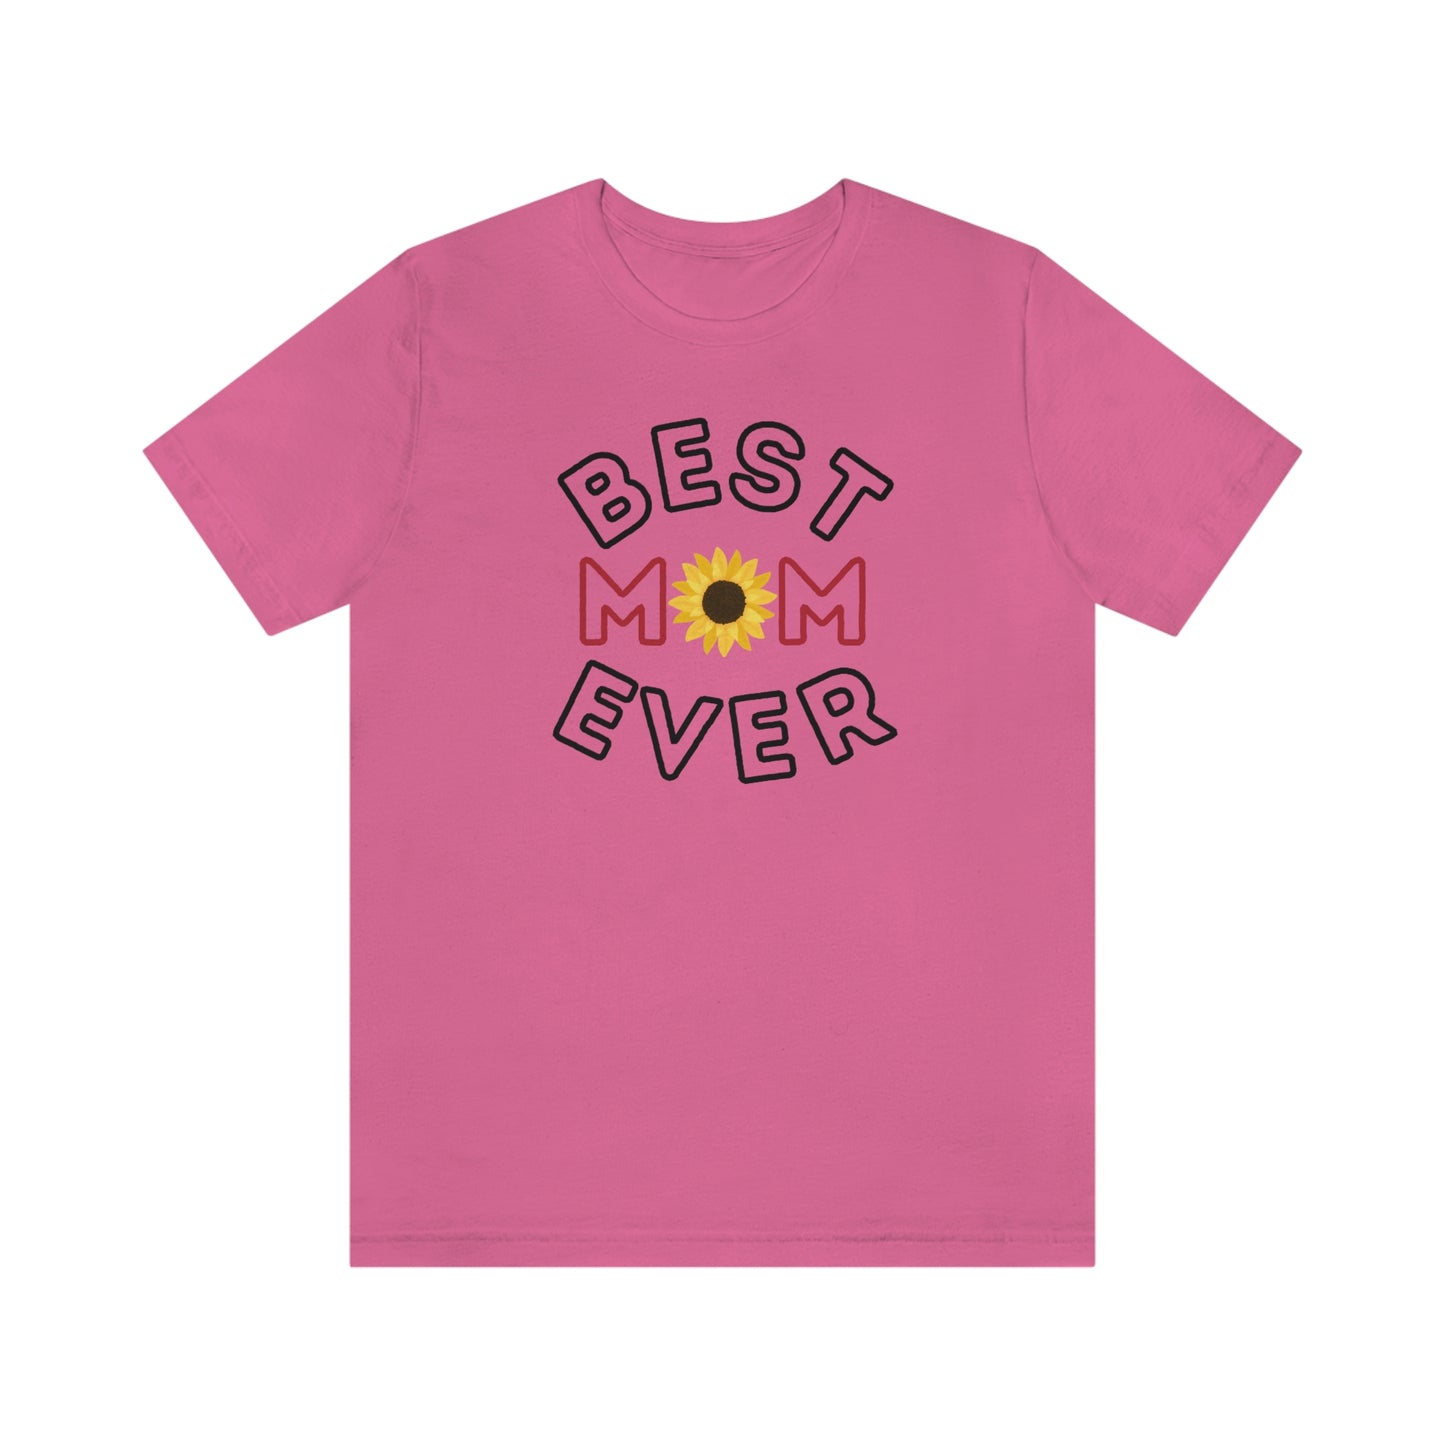 Best Mom Ever Shirt, Mothers day shirt, gift for mom, Mom birthday gift, Mothers day t shirts, Mothers shirts, Best mothers day gifta